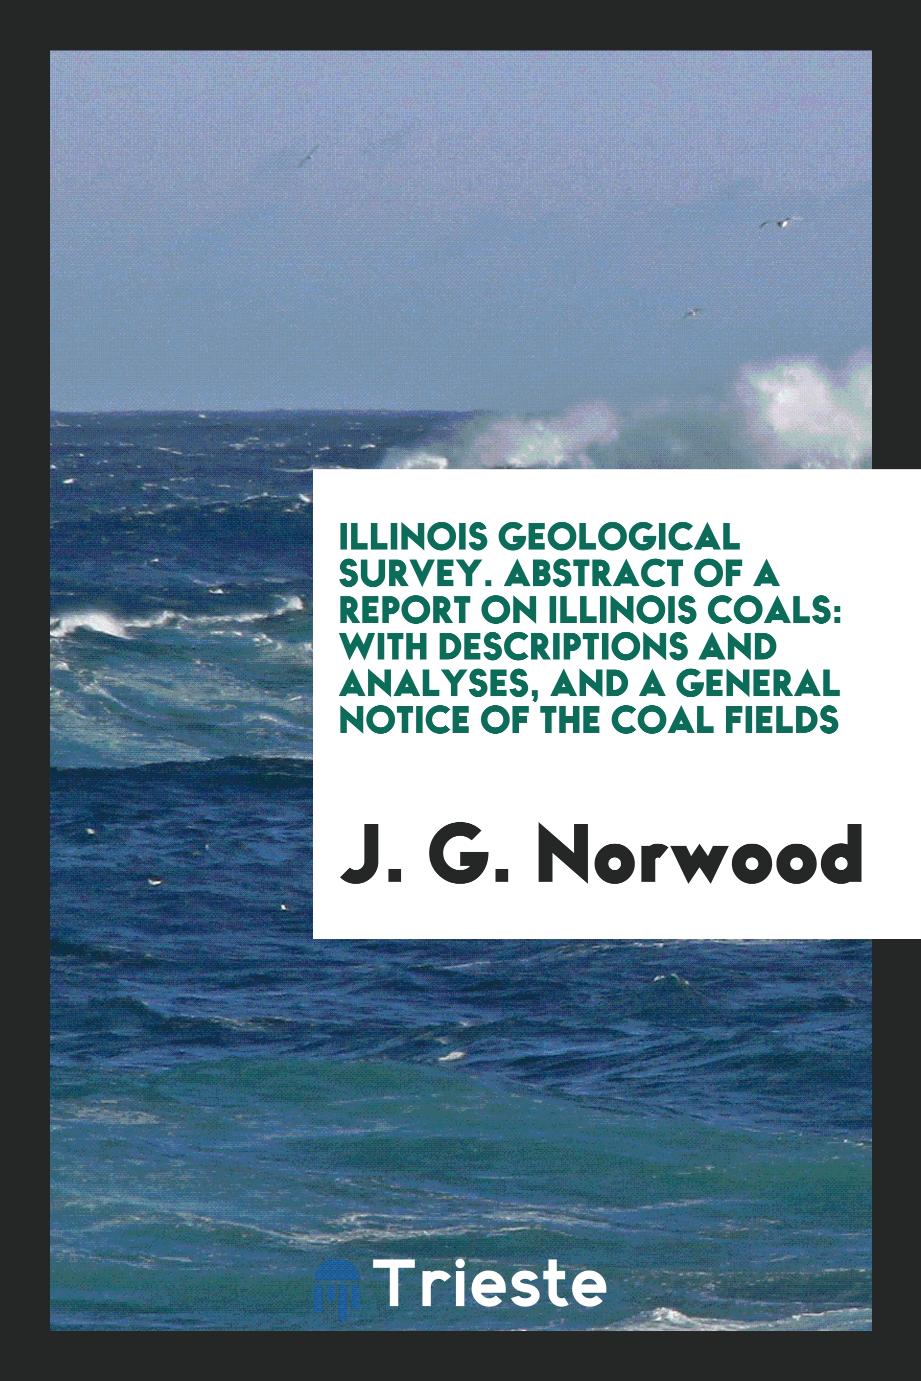 Illinois Geological Survey. Abstract of a Report on Illinois Coals: With Descriptions and Analyses, and a General Notice of the Coal Fields